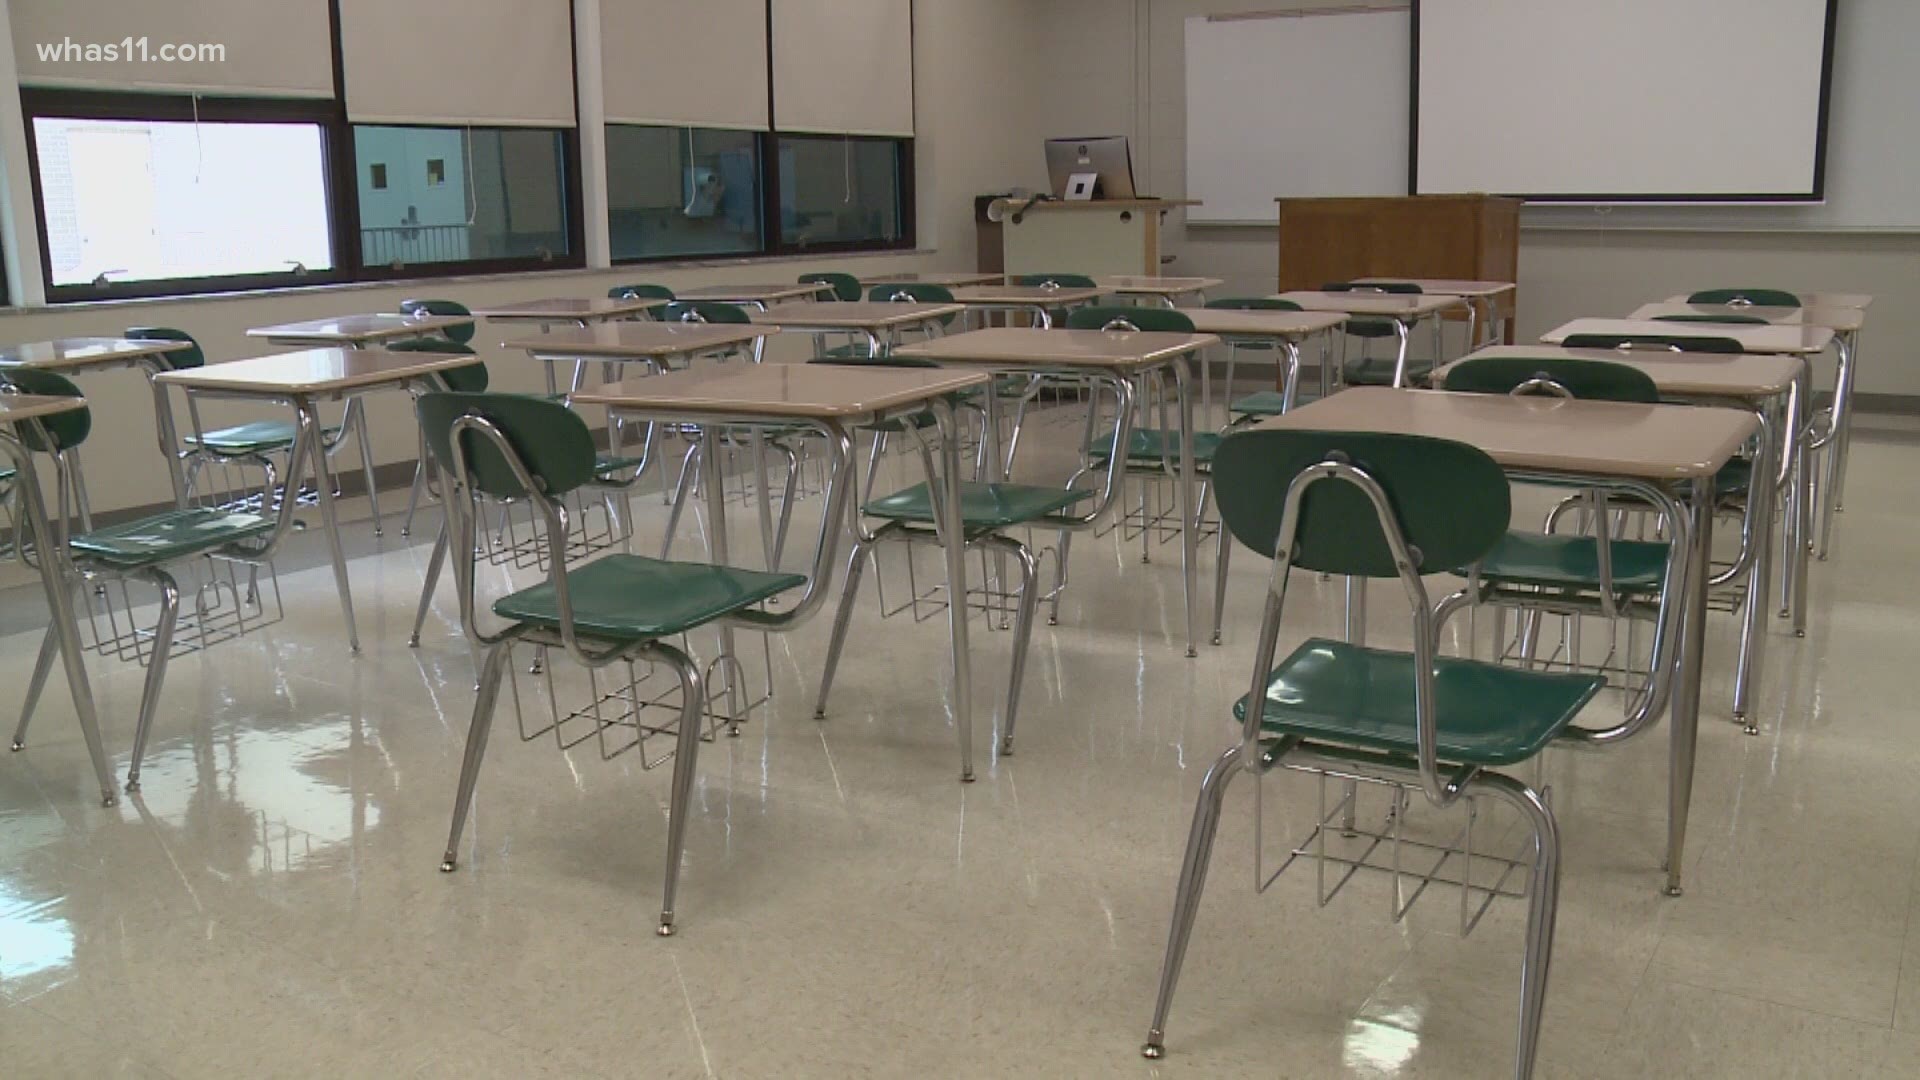 The governor recently ordered all schools, both public and private, temporarily stop in-person classes.